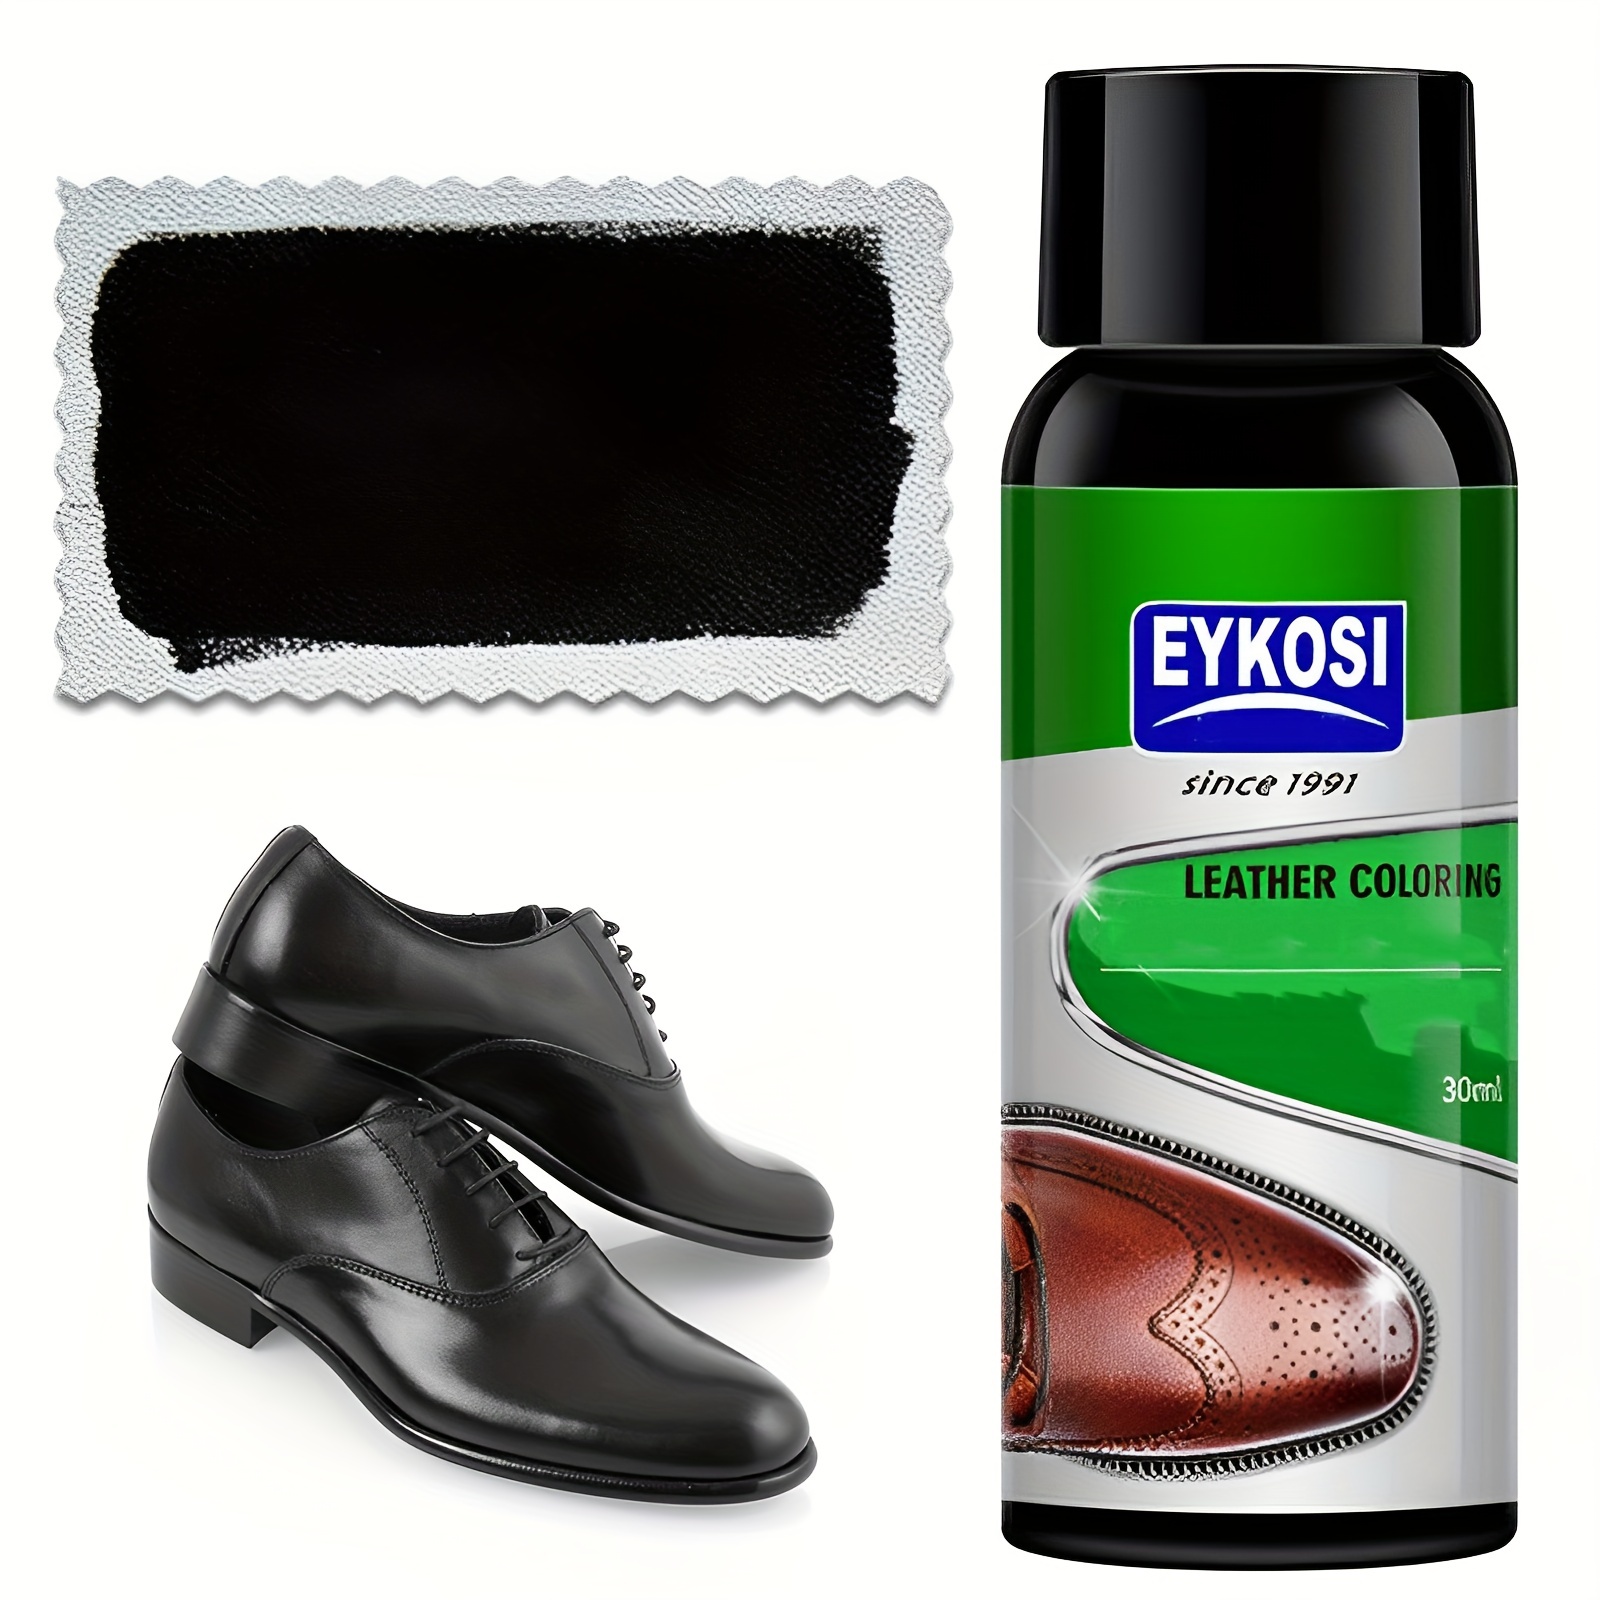 KIWI Leather Dye Restorer, for Shoes, Boots, Furniture, Jacket, Briefcase  an